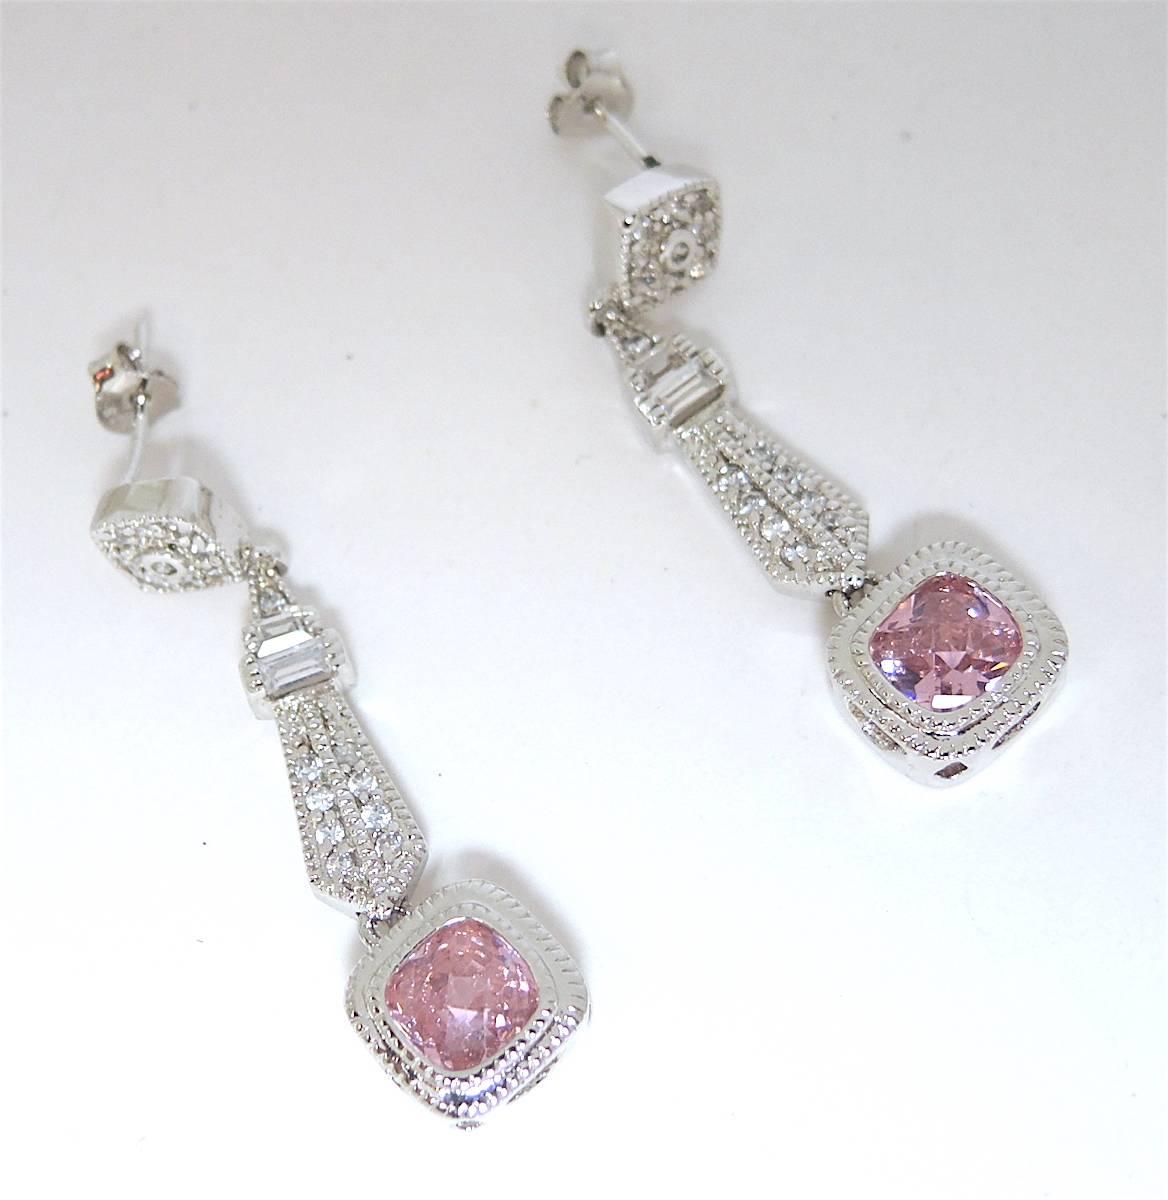 These beautiful drop earrings feature rich pink and clear crystals in a sterling silver setting. These pierced earrings measure 1-1/2” x 1/4” and are in excellent condition.    